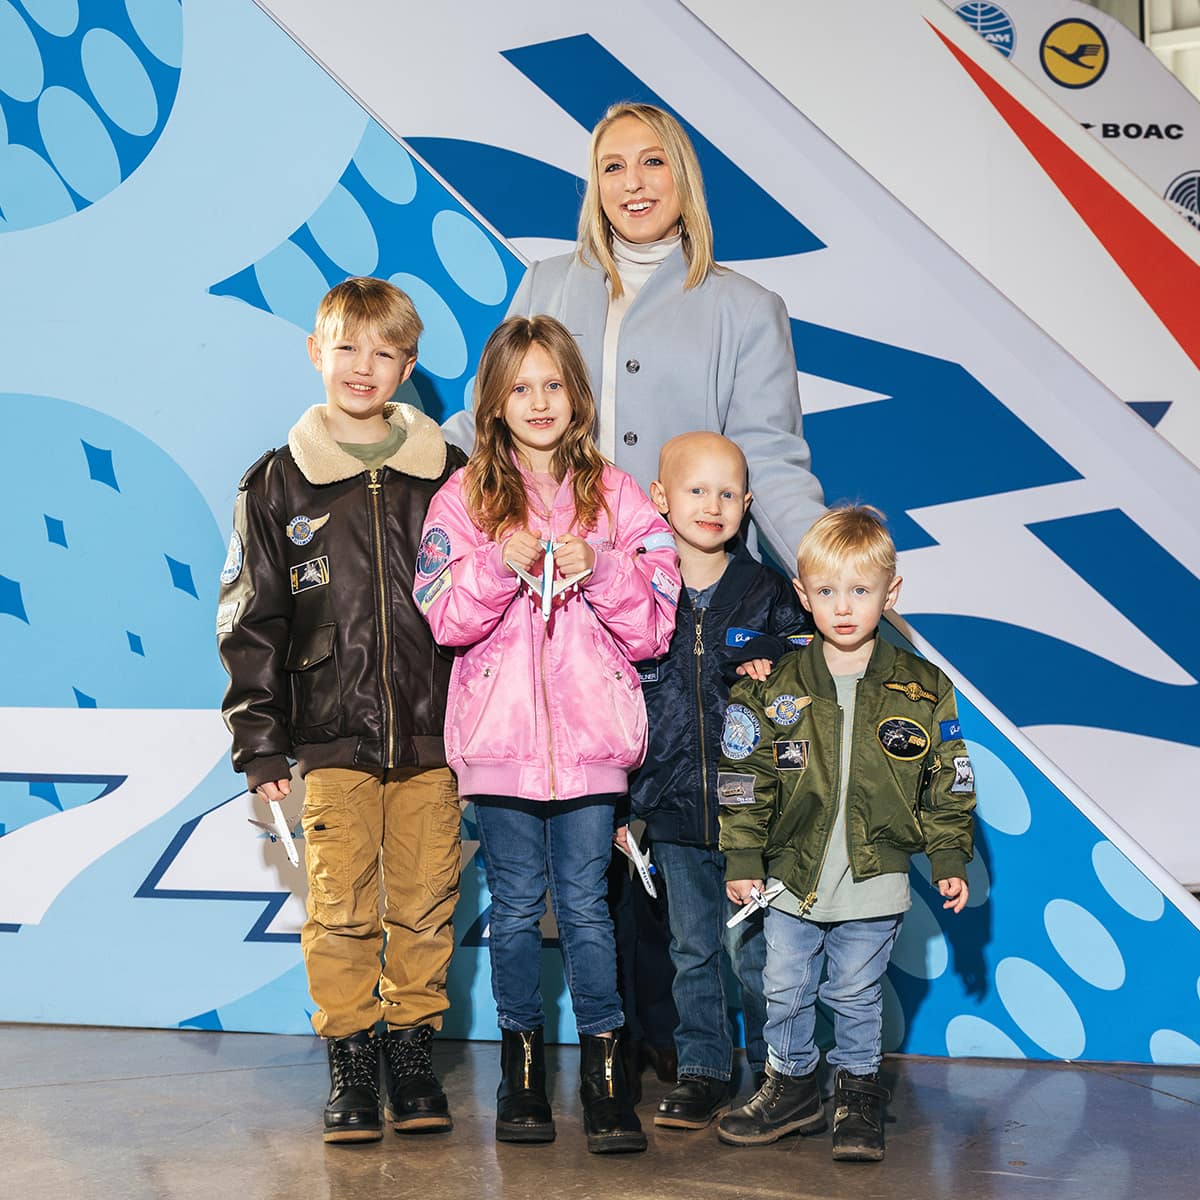 Rachelle Strong poses with her children (l to r), Cooper, 8, Summer, 7, Quinn, 4, and Niall, 2, who are decked out in their best aviation gear at the Boeing Museum.